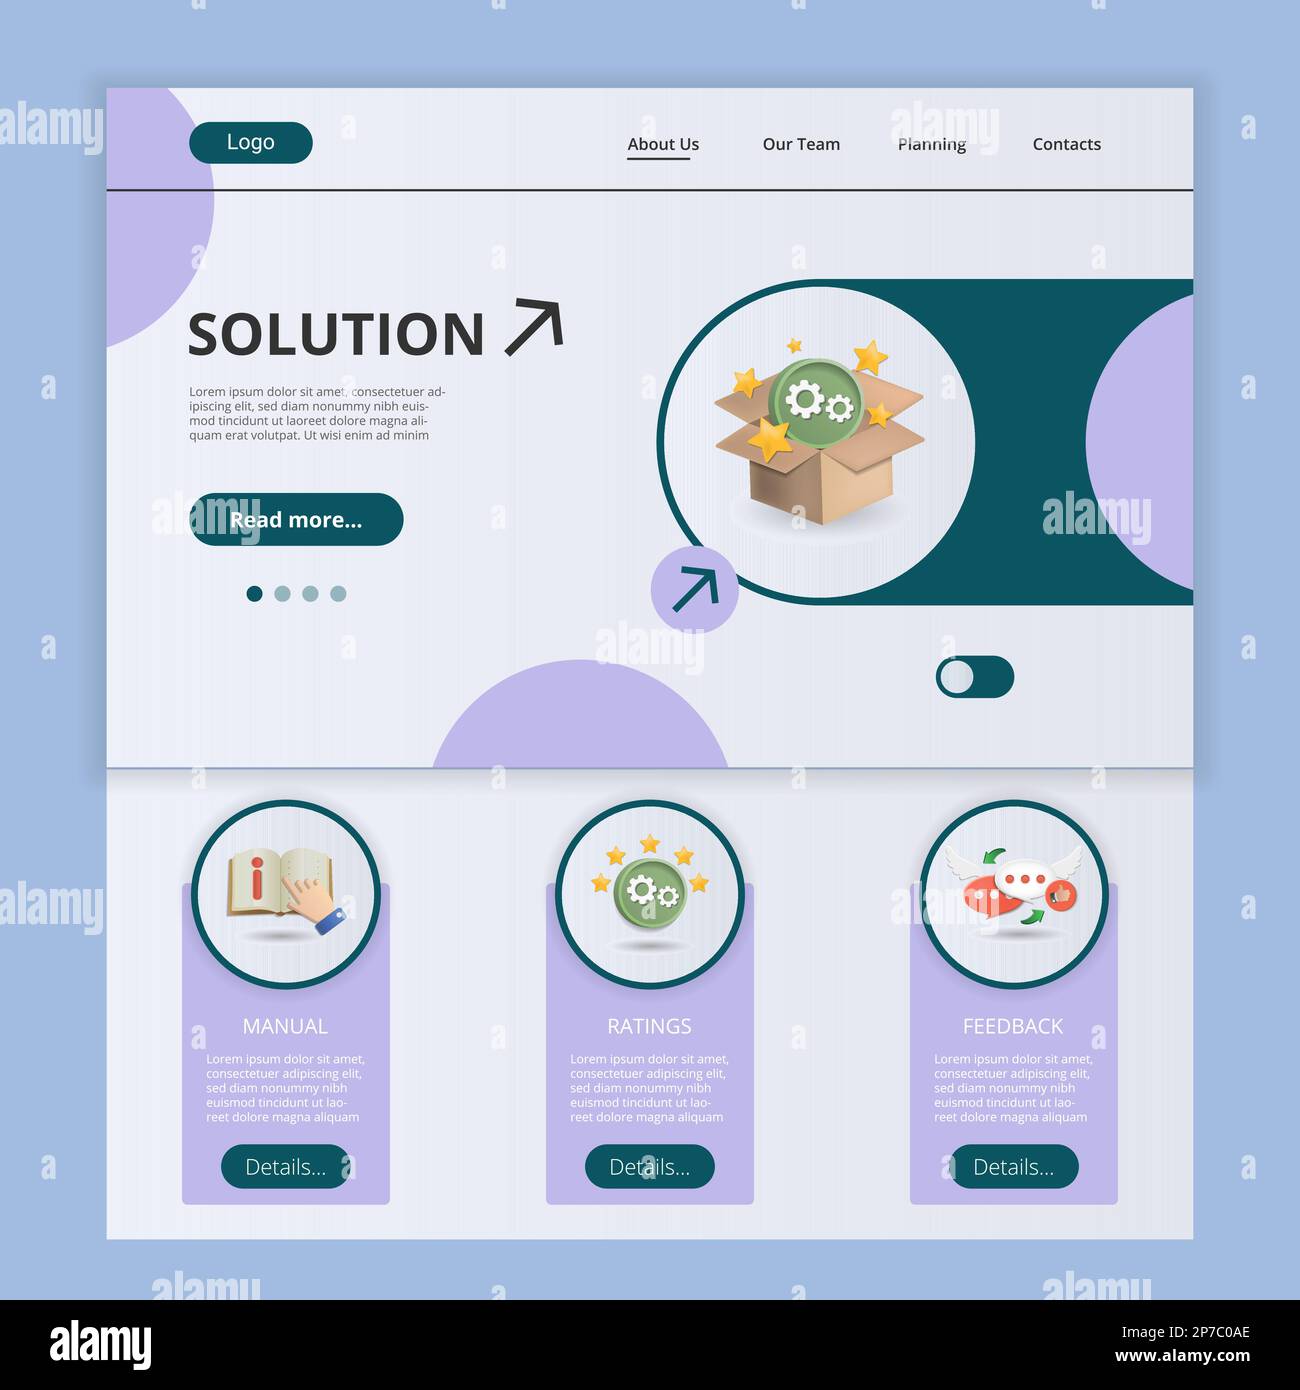 https://c8.alamy.com/comp/2P7C0AE/solution-flat-landing-page-website-template-manual-ratings-feedback-web-banner-with-header-content-and-footer-vector-illustration-2P7C0AE.jpg